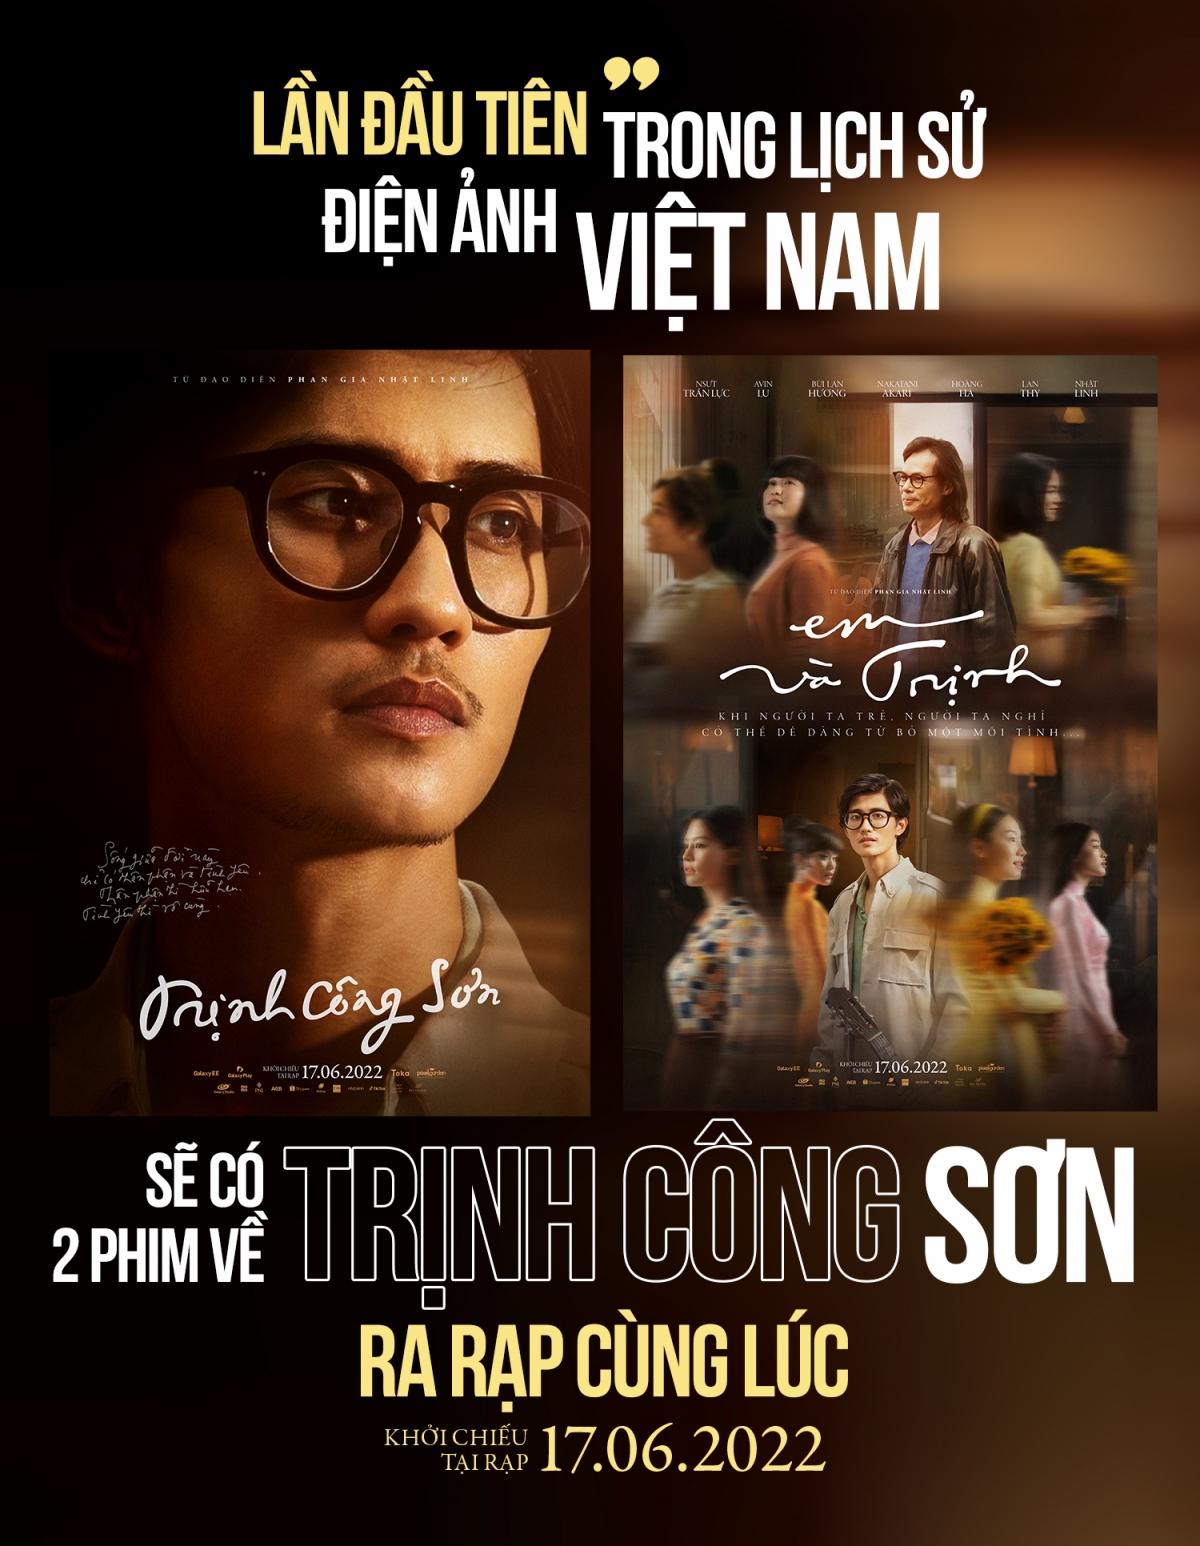 Released at the same time 2 movies about musician Trinh Cong Son - Photo 1.